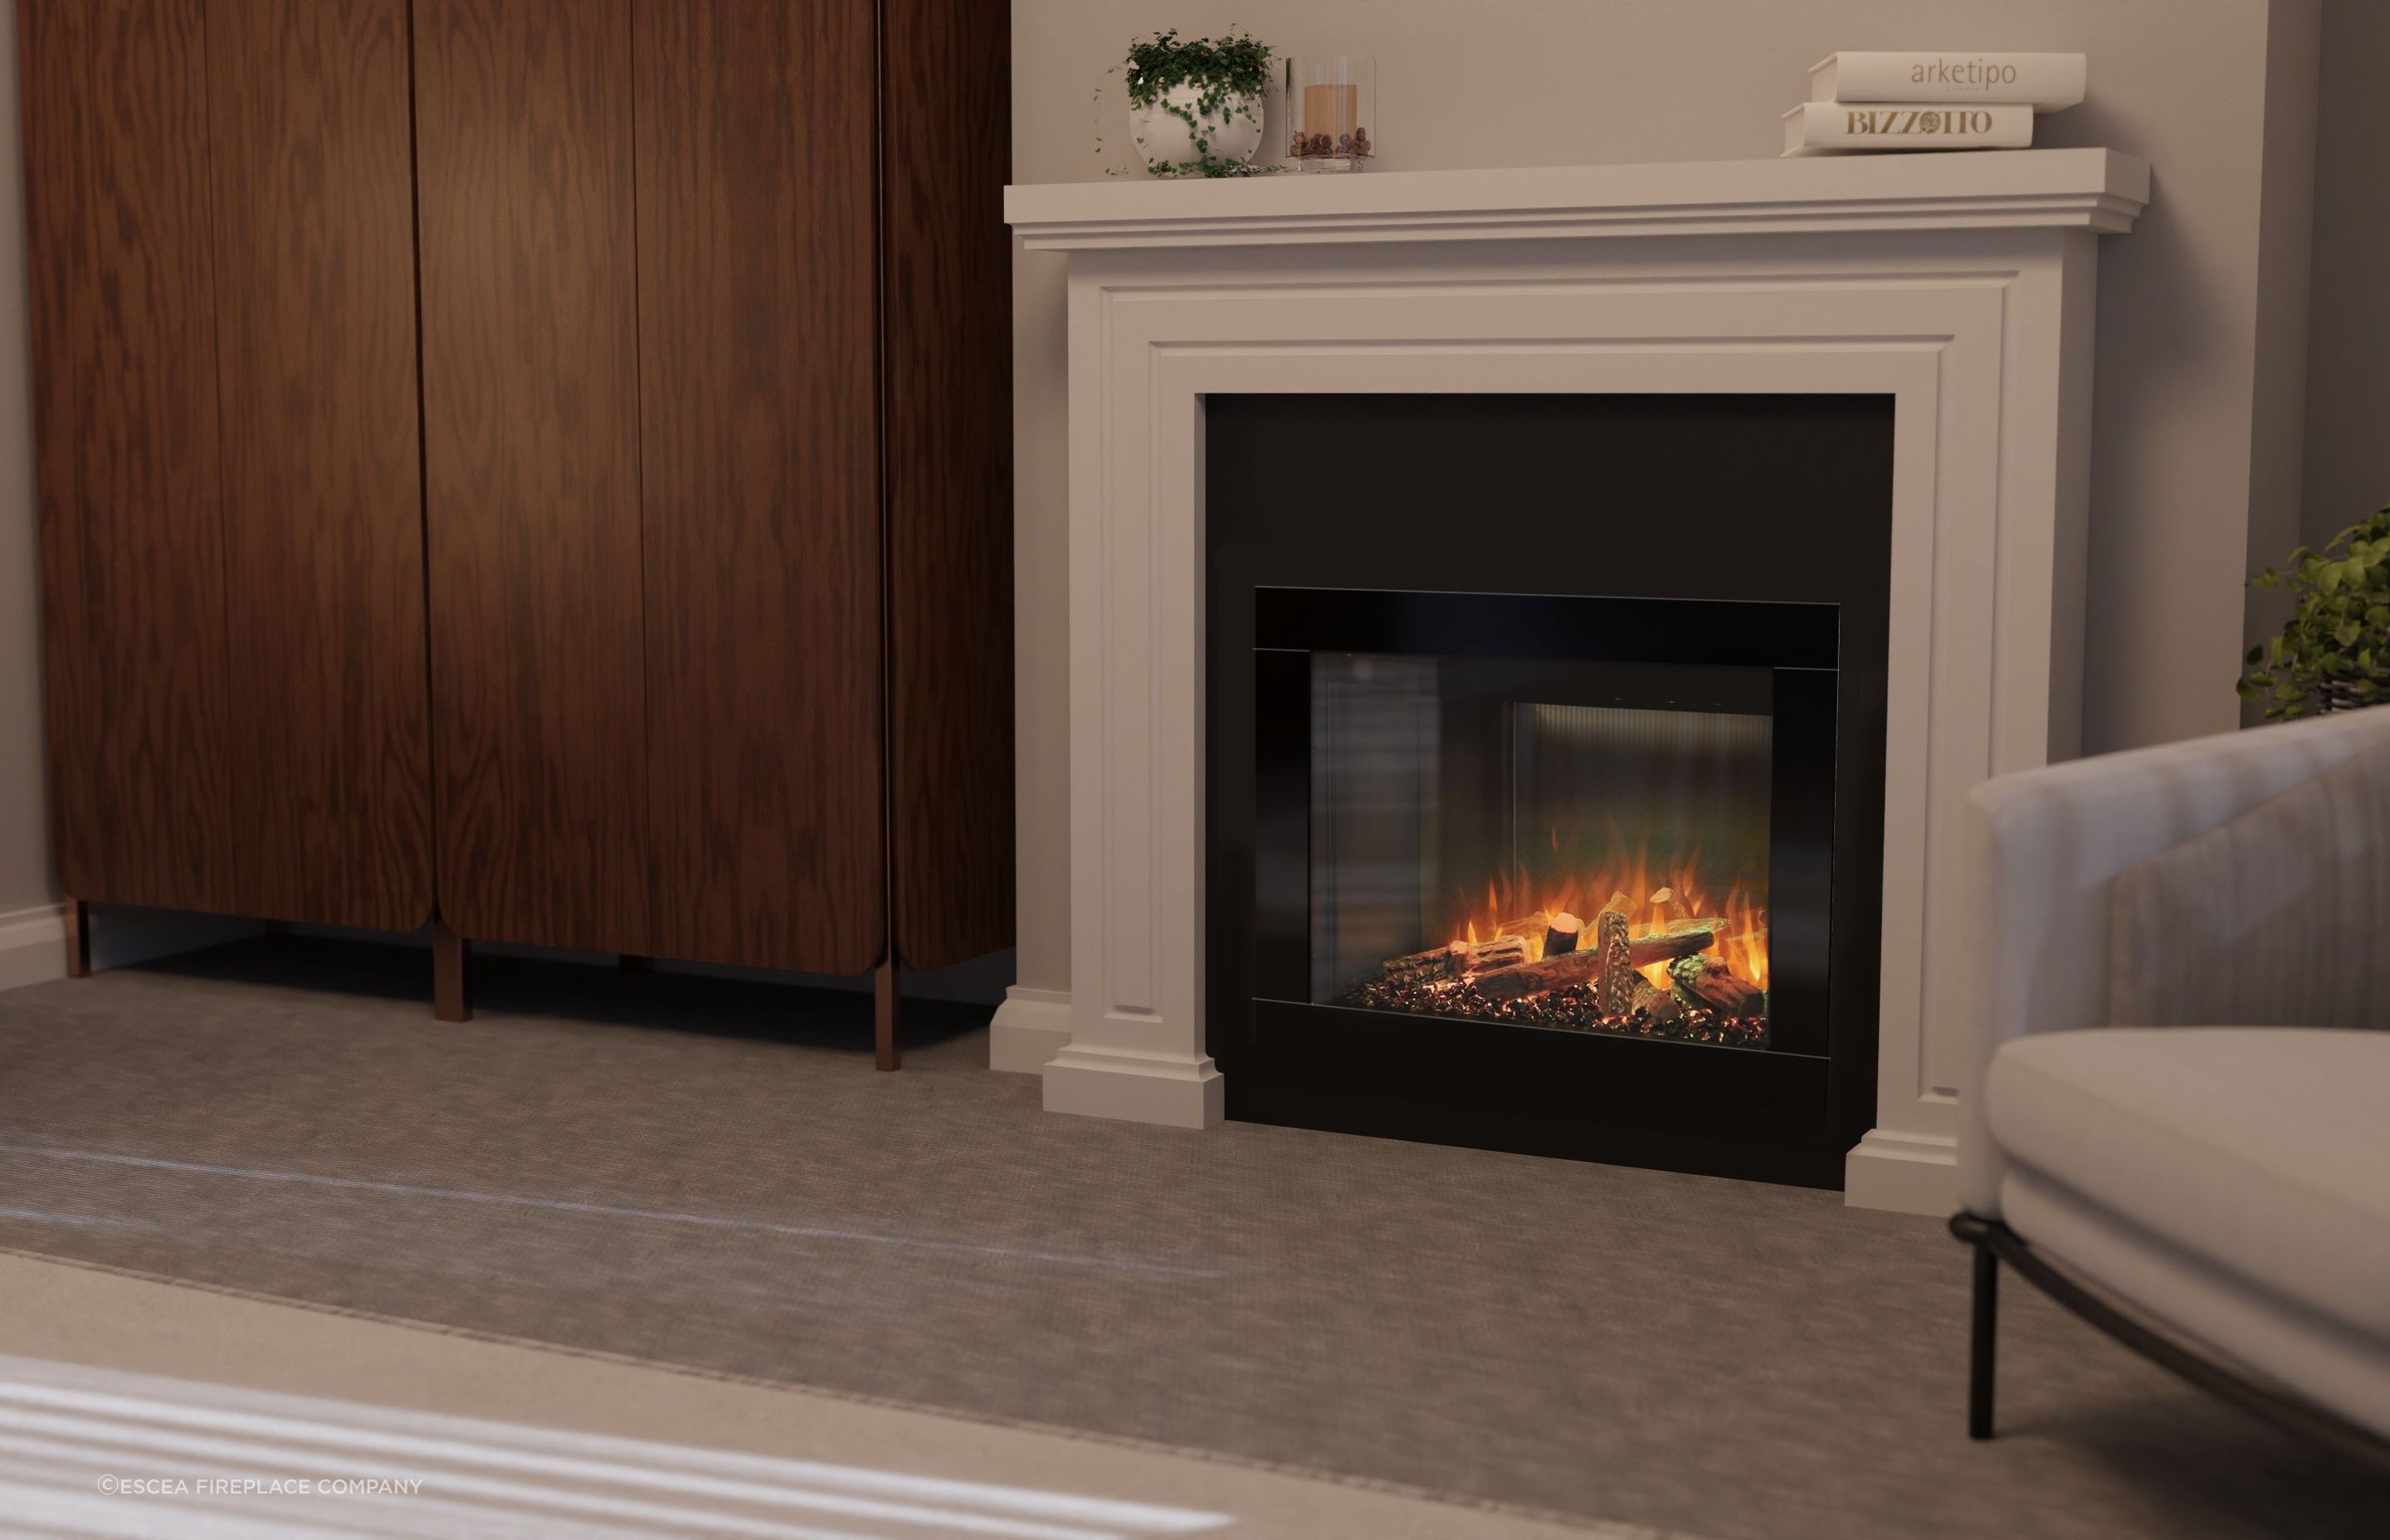 Easily installed within an existing cavity, the Ambe Square30 Electric Fireplace is a quick way add comfort and warmth